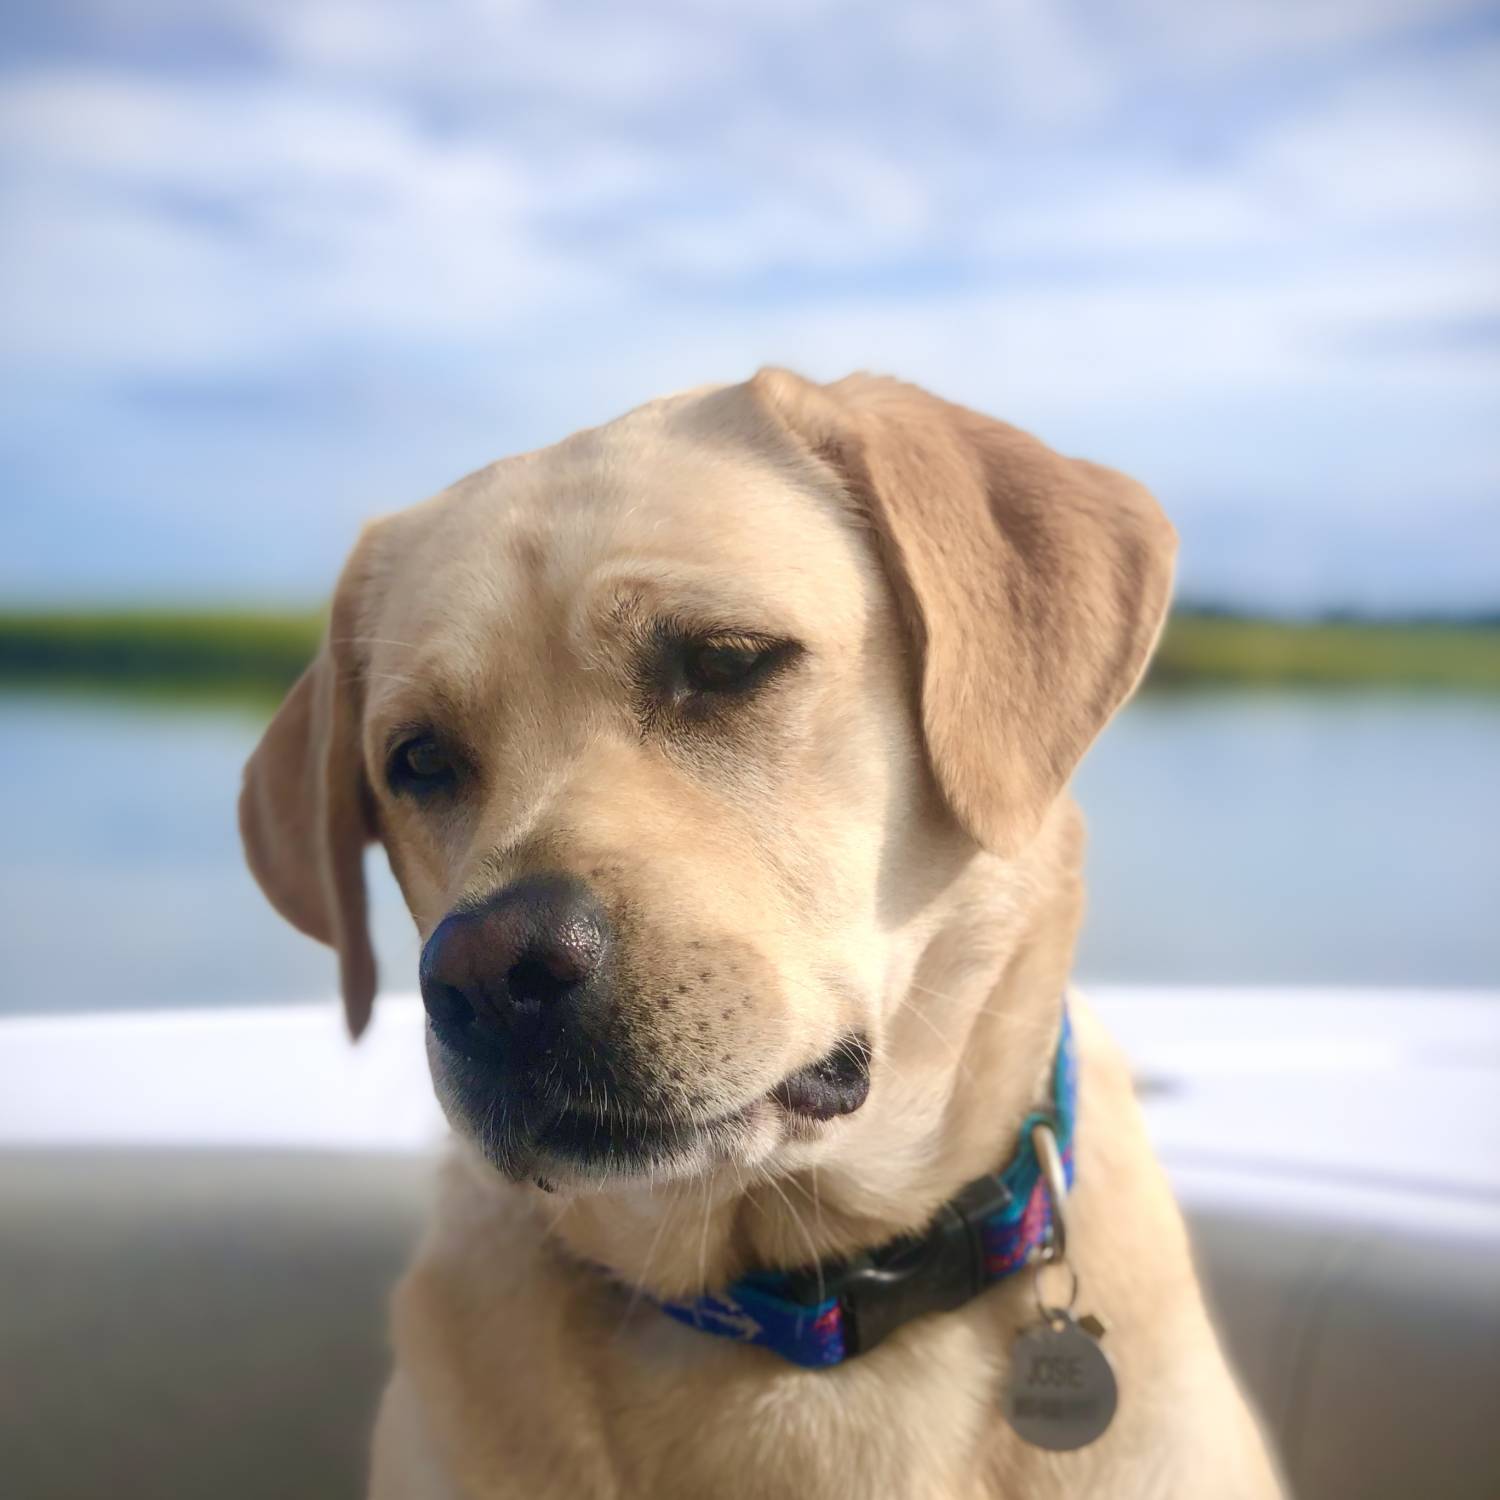 Josie is our neighbors dog and she was very reluctant to come boating with us. She finally sett...